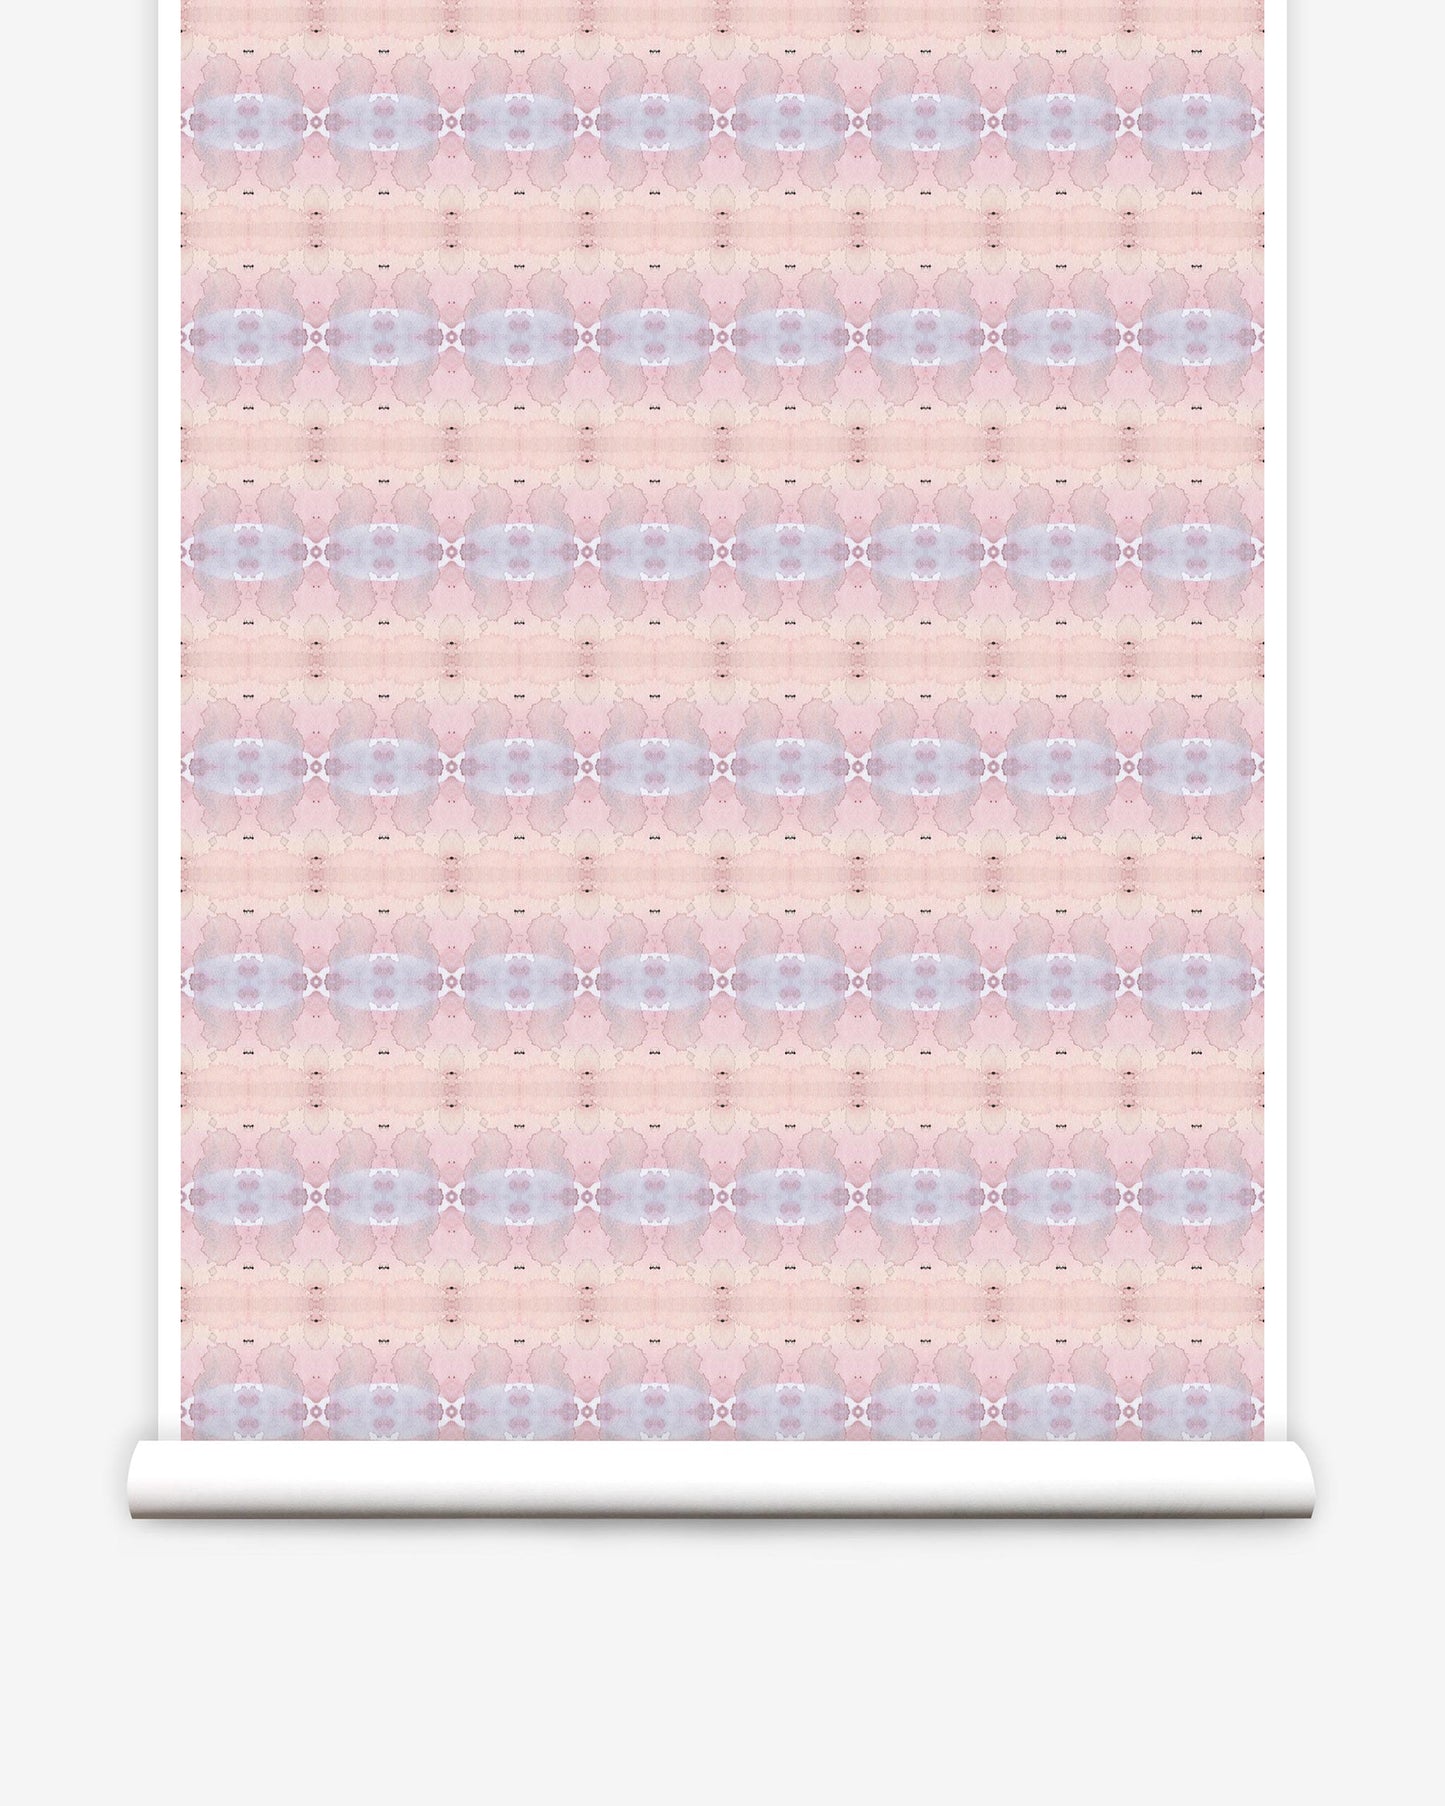 A pink and blue abstract pattern on wallpaper, inspired by the American West, the Setting Sun Wallpaper is reminiscent of a light raspberry hueon wallpaper